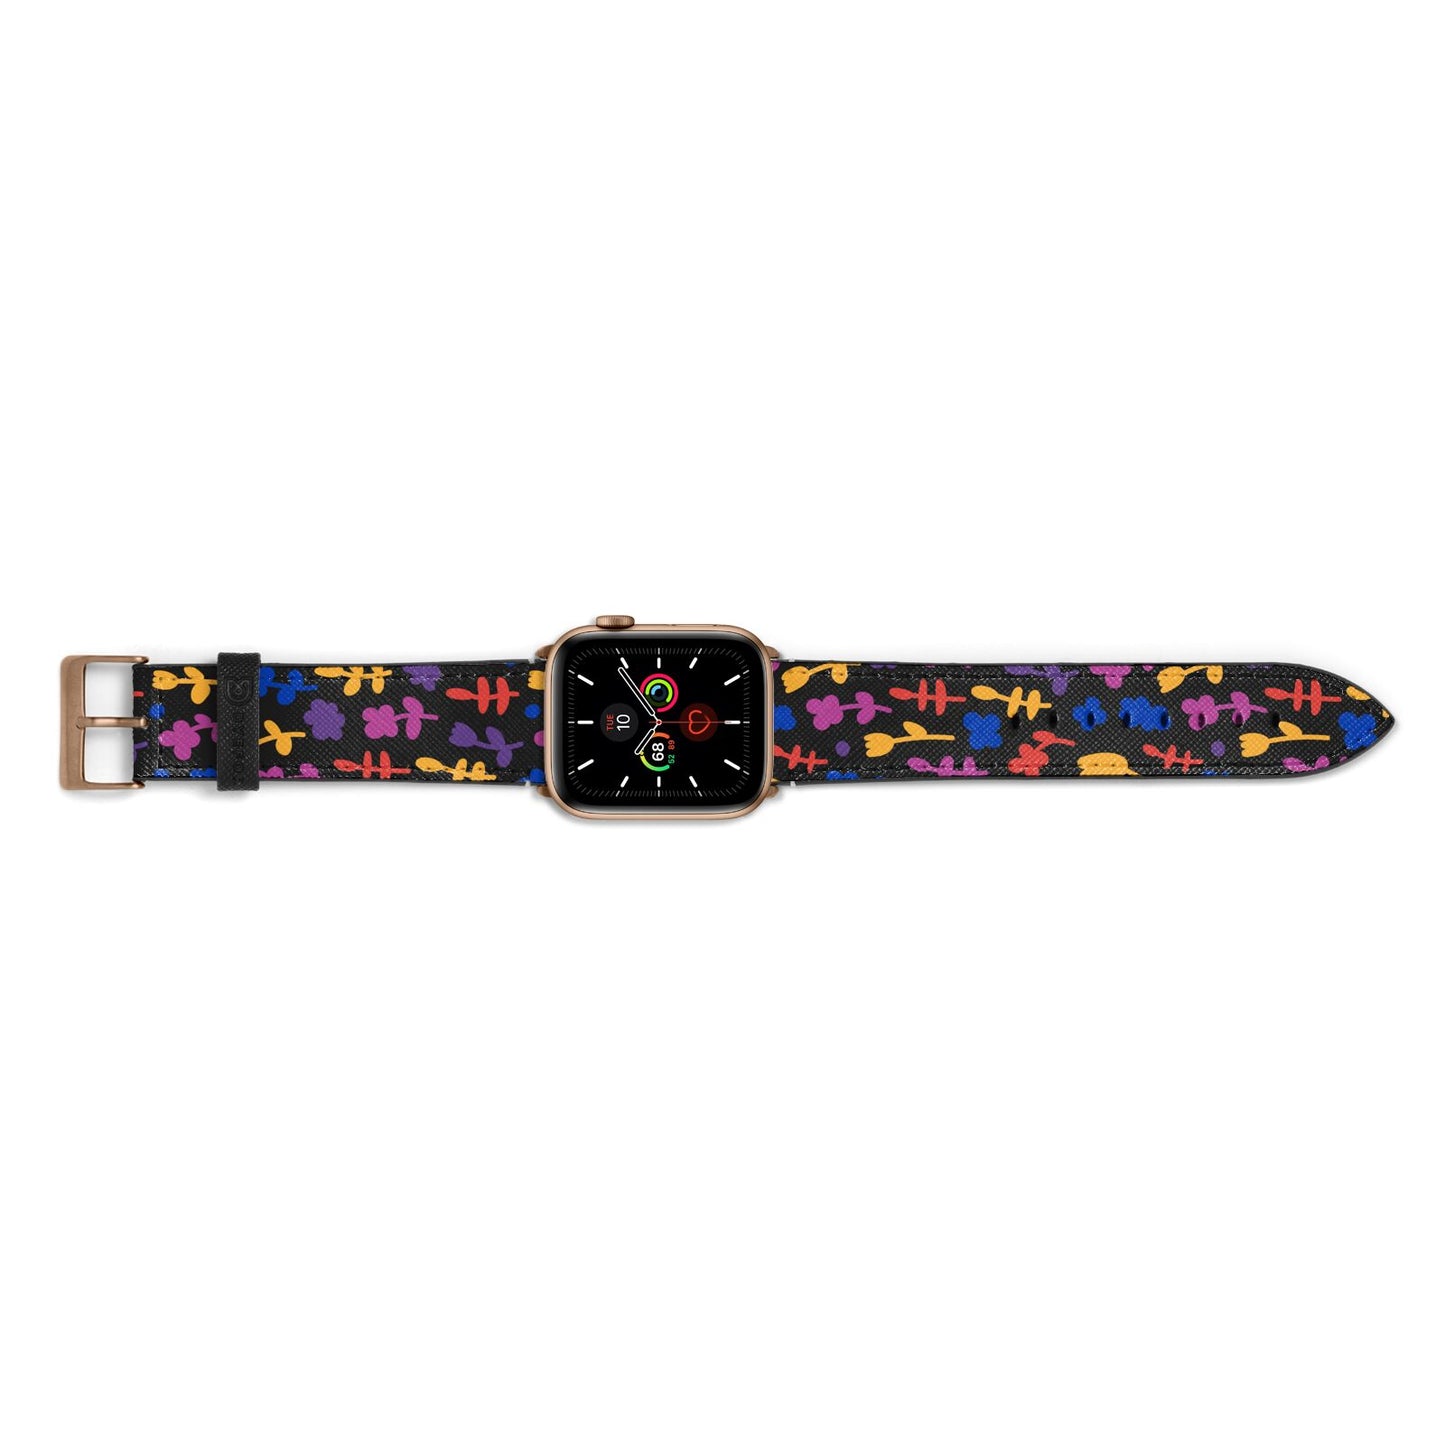 Abstract Floral Apple Watch Strap Landscape Image Gold Hardware